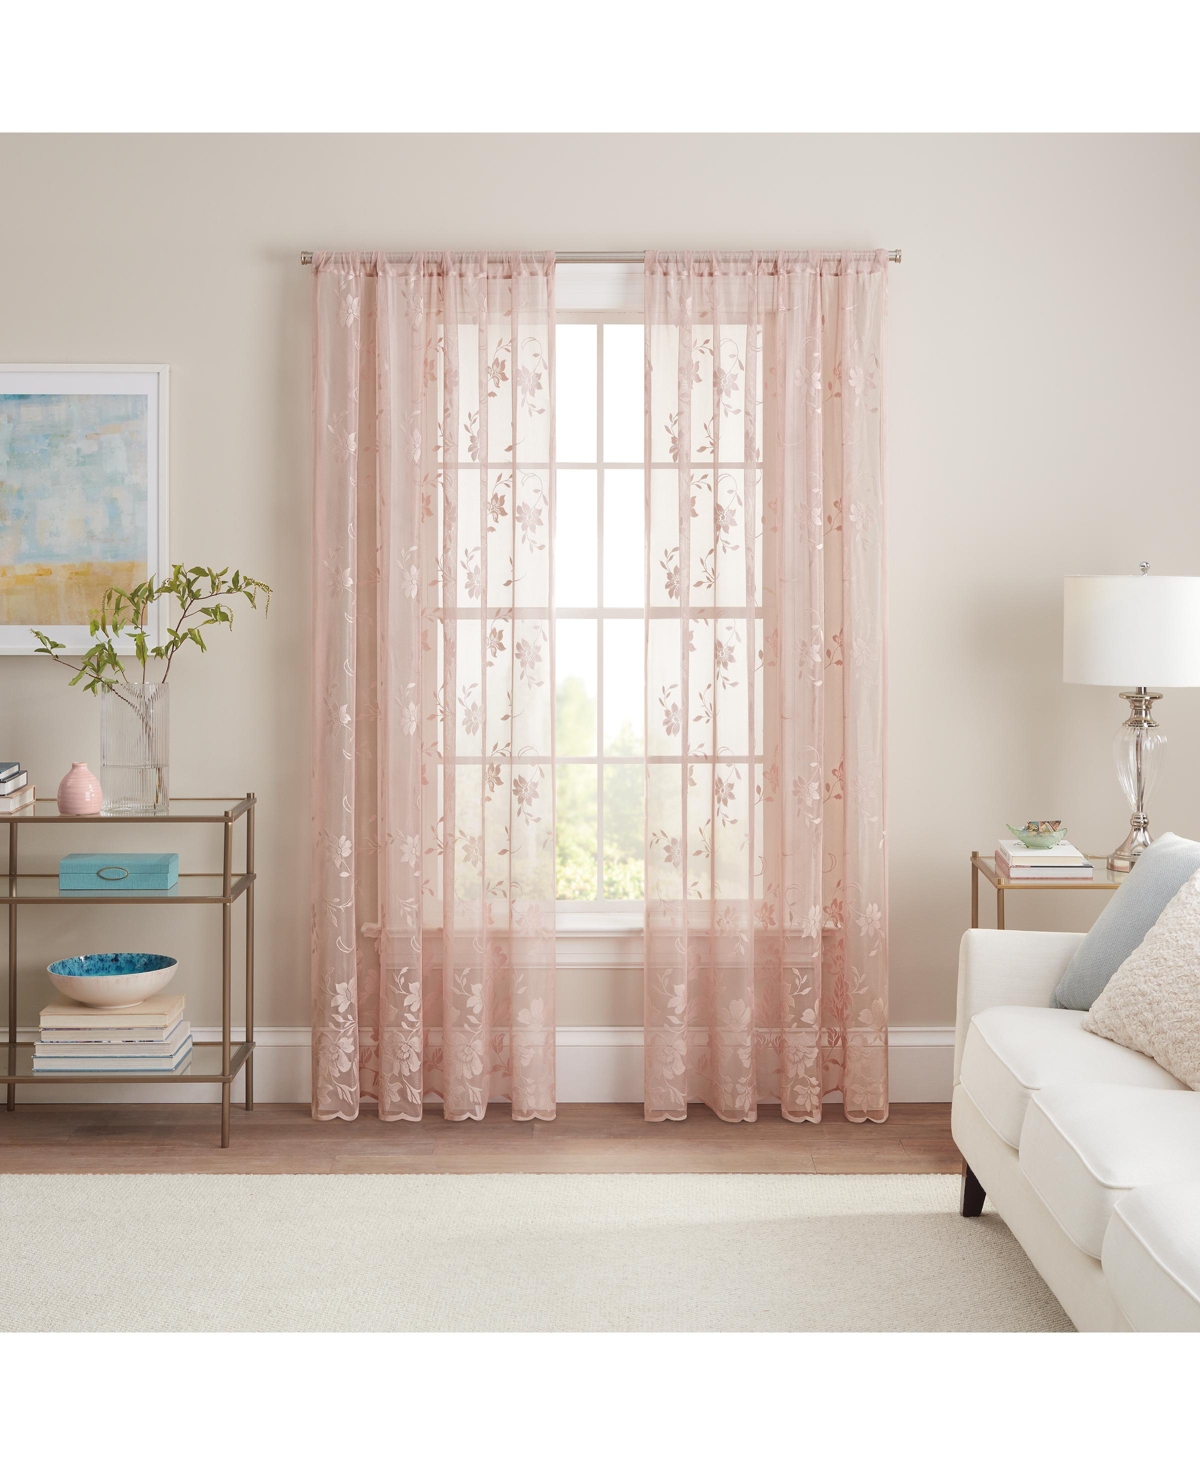 Sherry Floral Lace Sheer Rod Pocket Curtain Panel, 54" x 84" - Blush